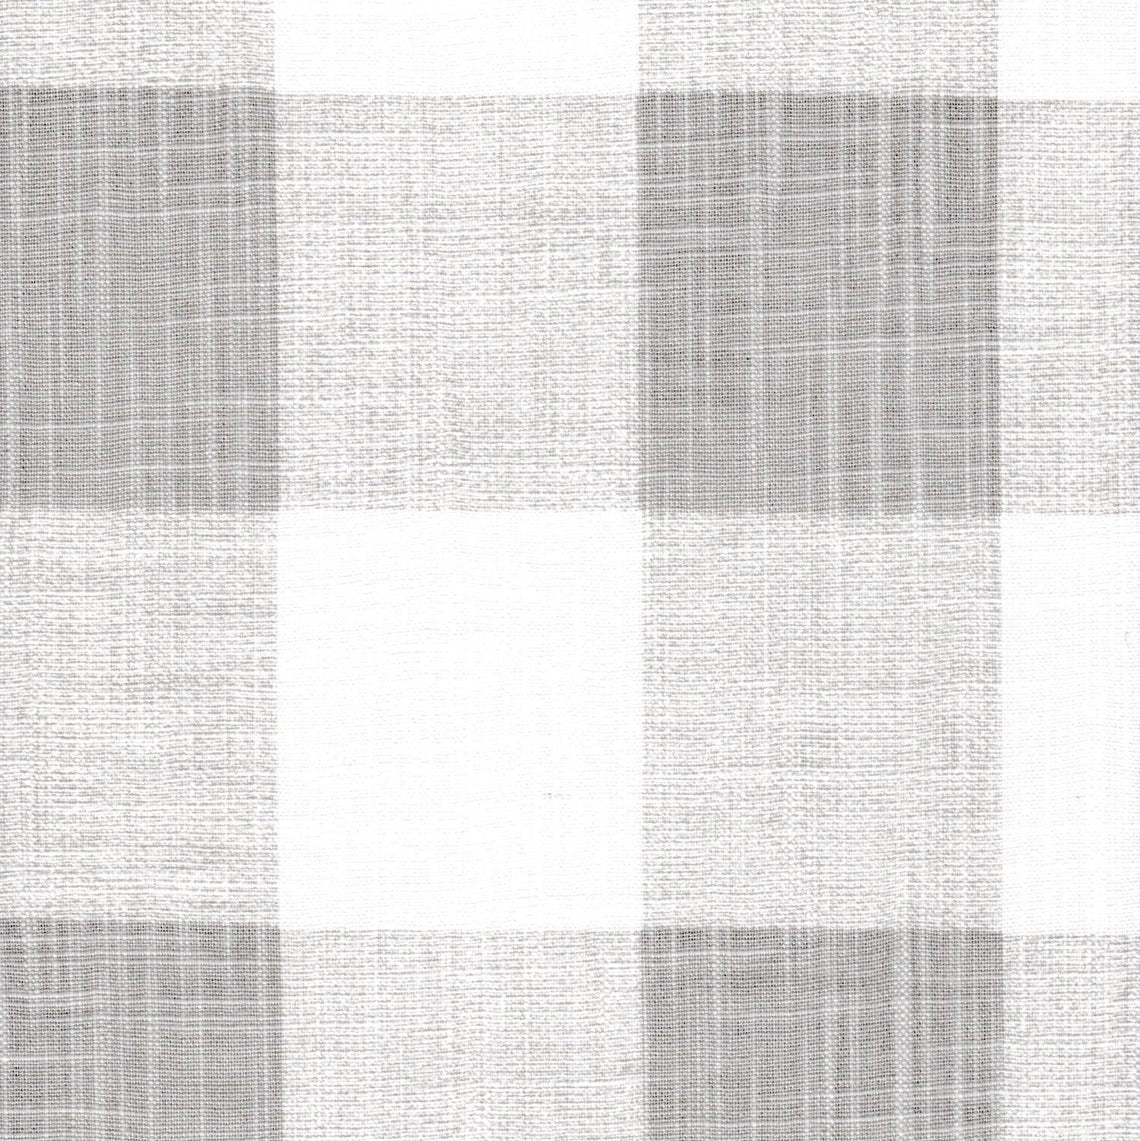 rod pocket curtain panels pair in anderson french grey buffalo check plaid